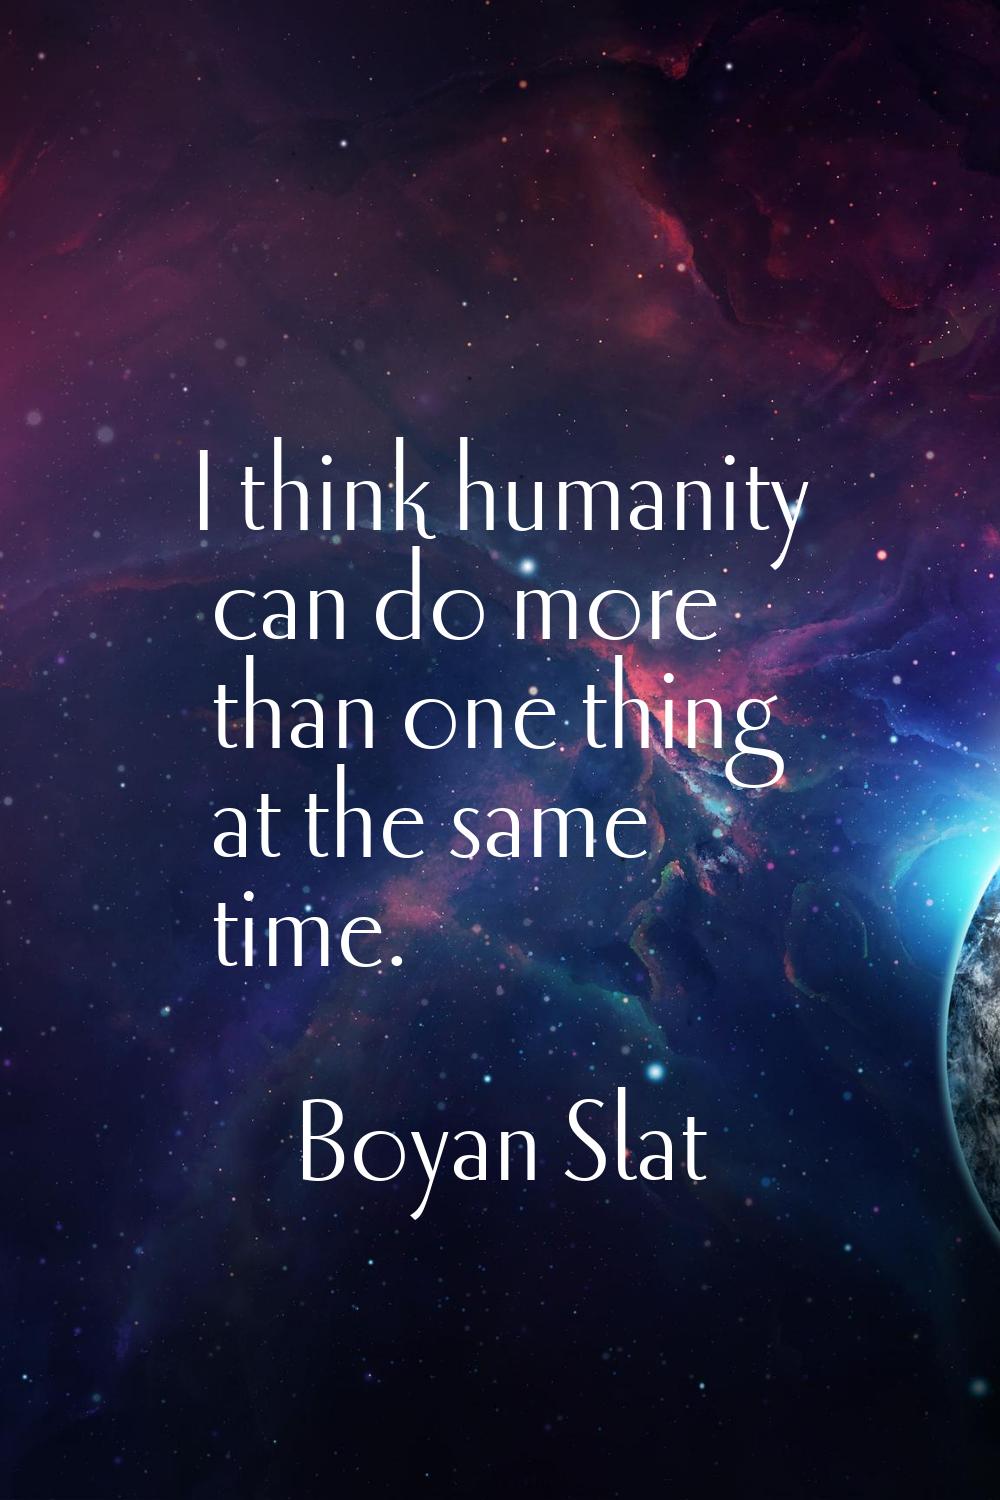 I think humanity can do more than one thing at the same time.